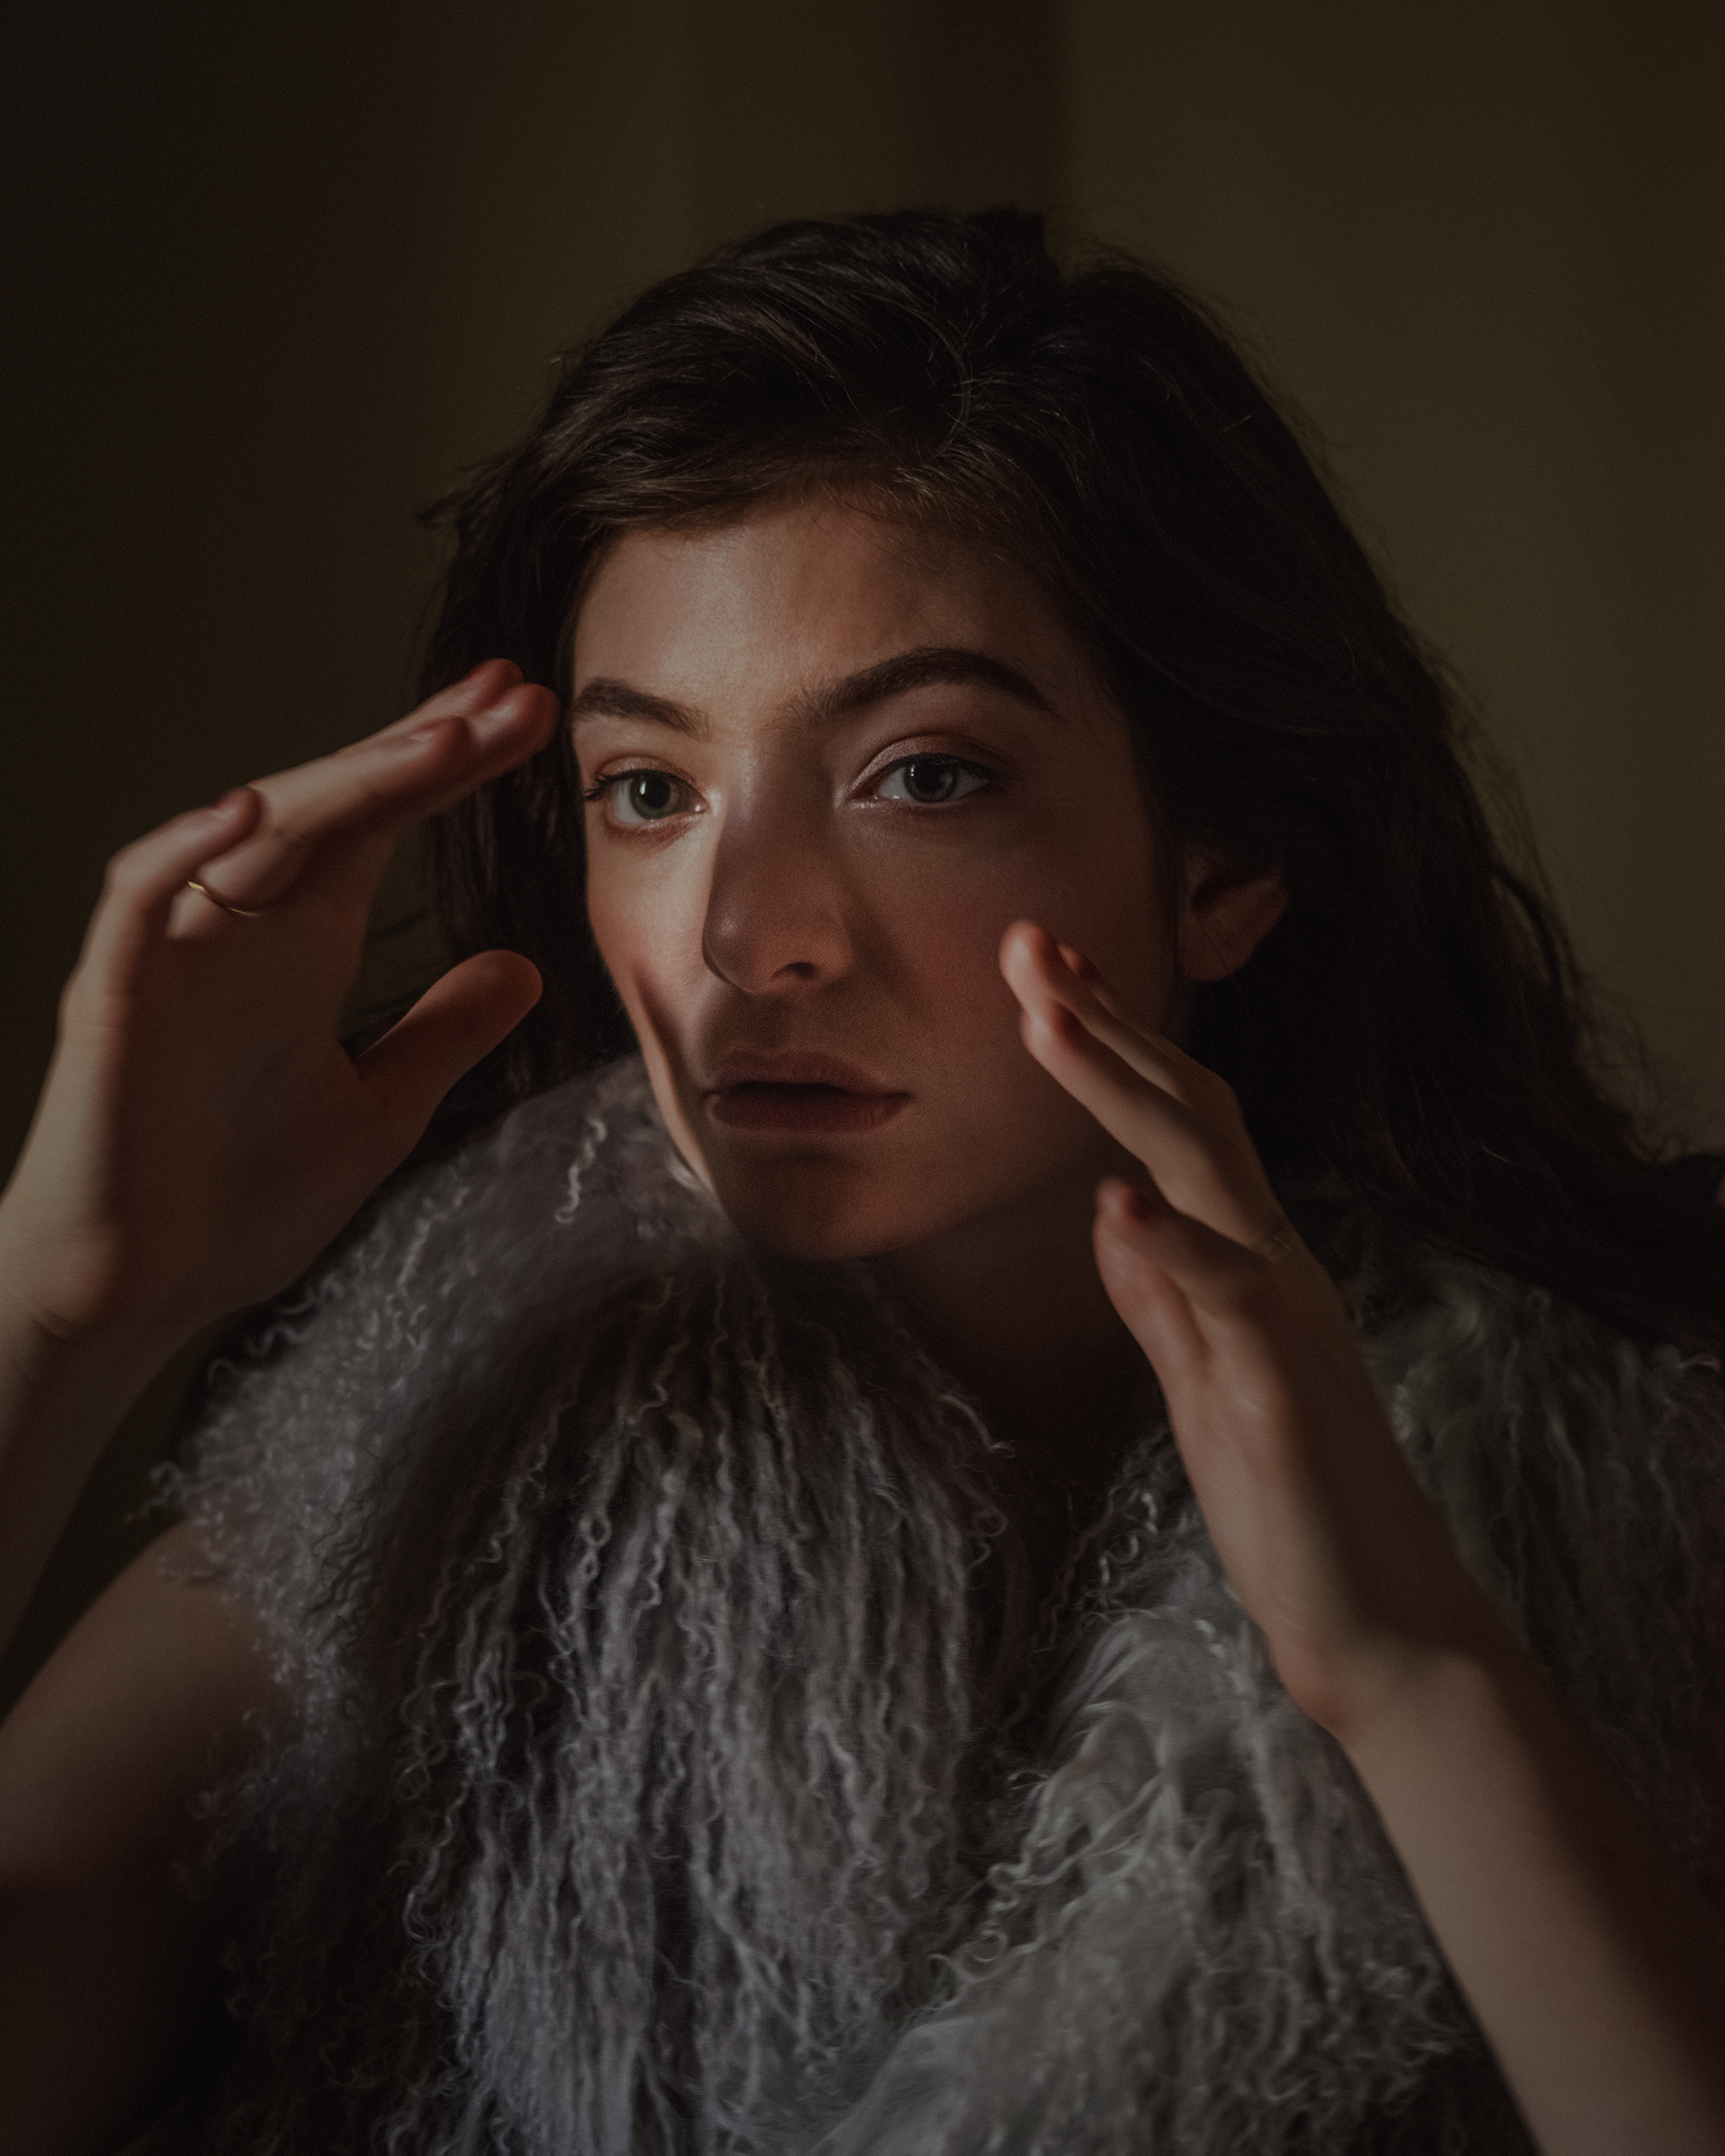 Lorde photographed at the Chateau Marmont Hotel in Los Angeles on May 18, 2017. (Mark Mahaney for TIME)